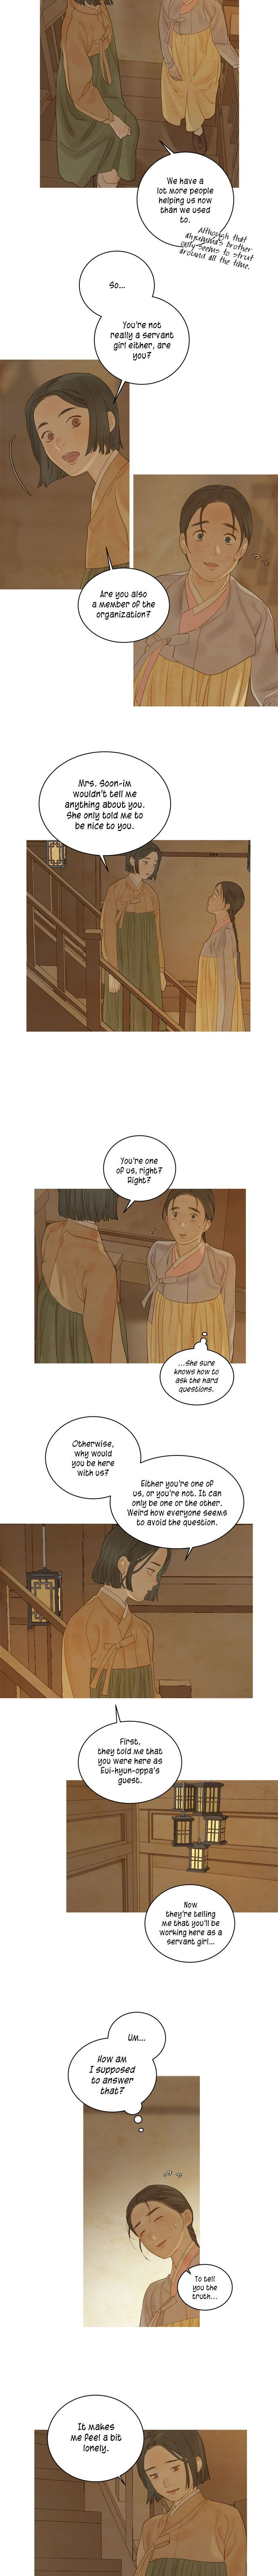 Gorae Byul - The Gyeongseong Mermaid - Chapter 30 Page 3